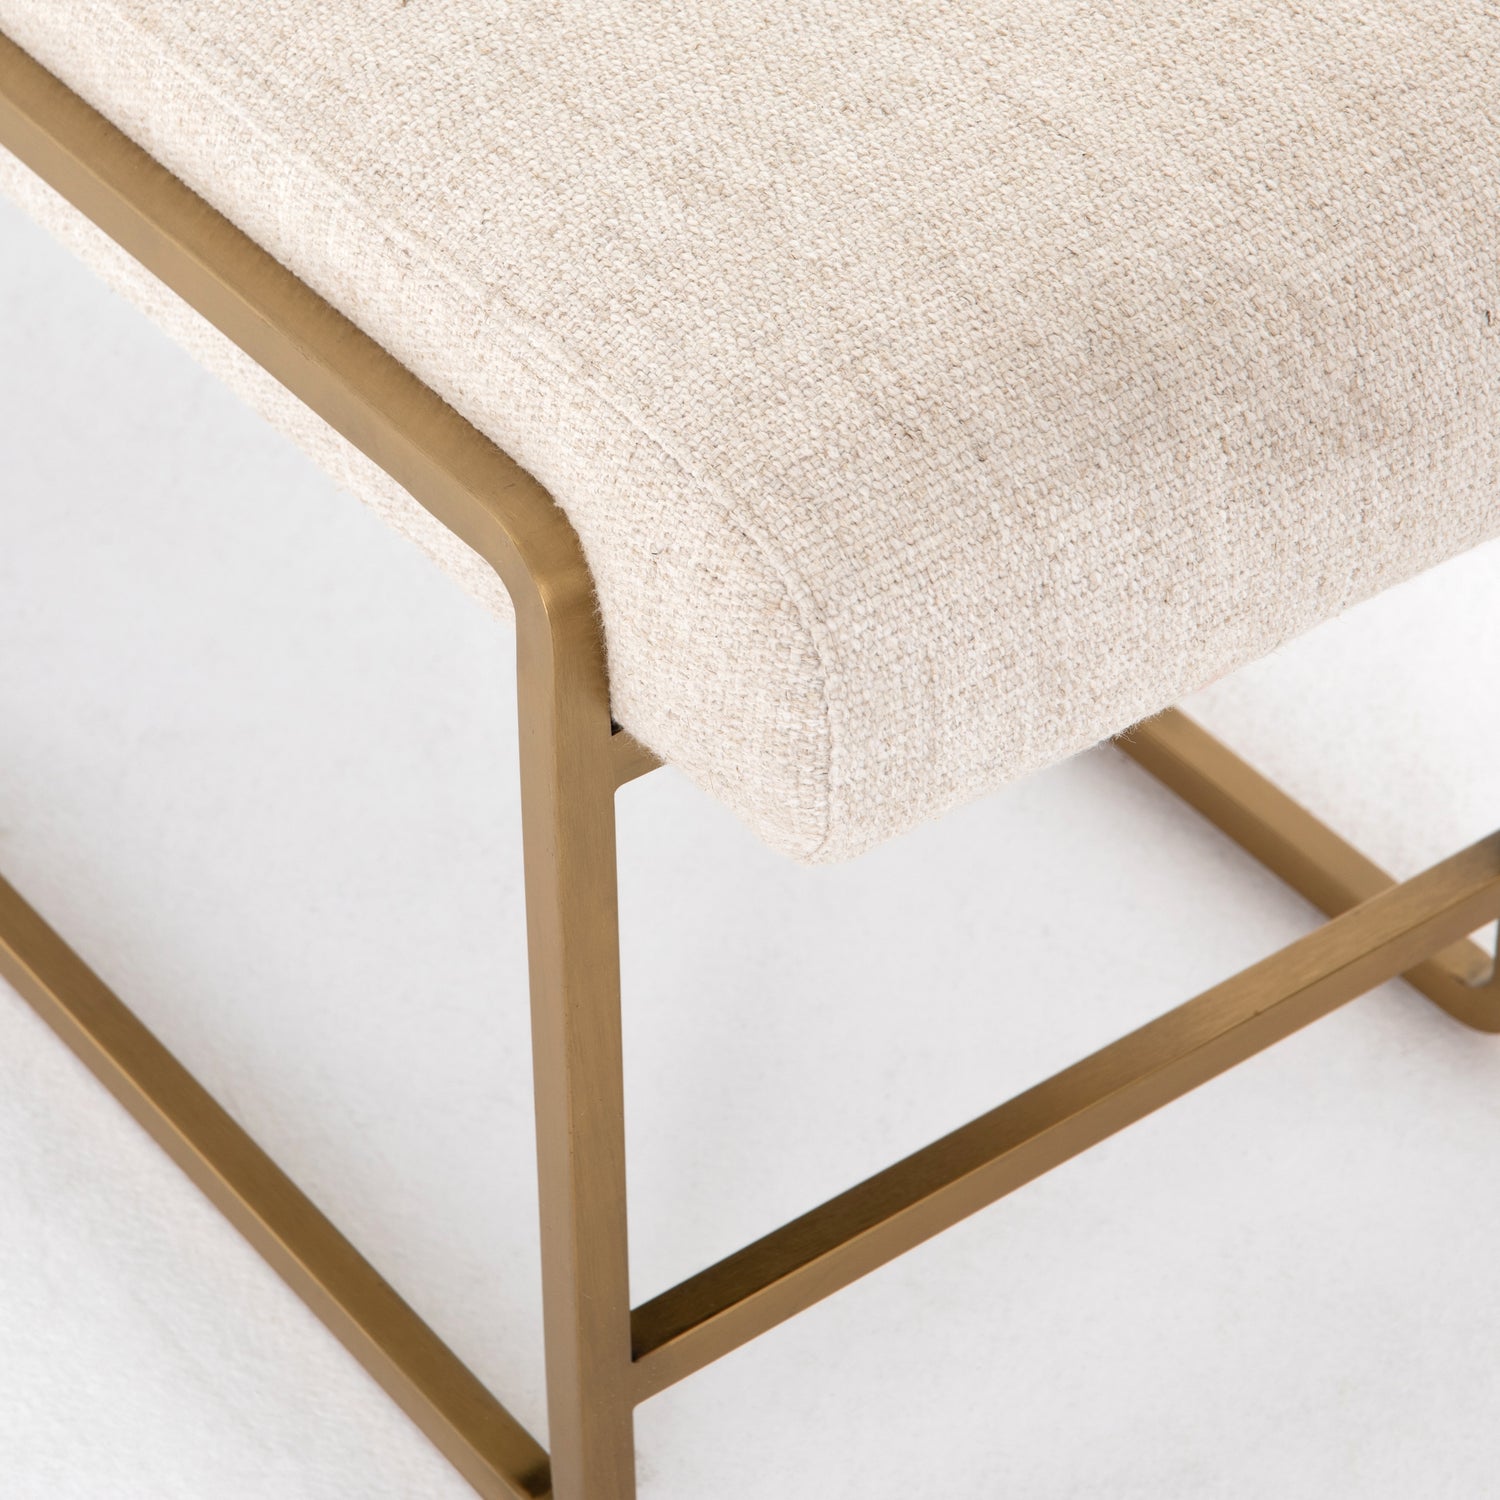 Thames Cream Fabric with Polished Brass Stainless Steel | Sled Bench | Valley Ridge Furniture